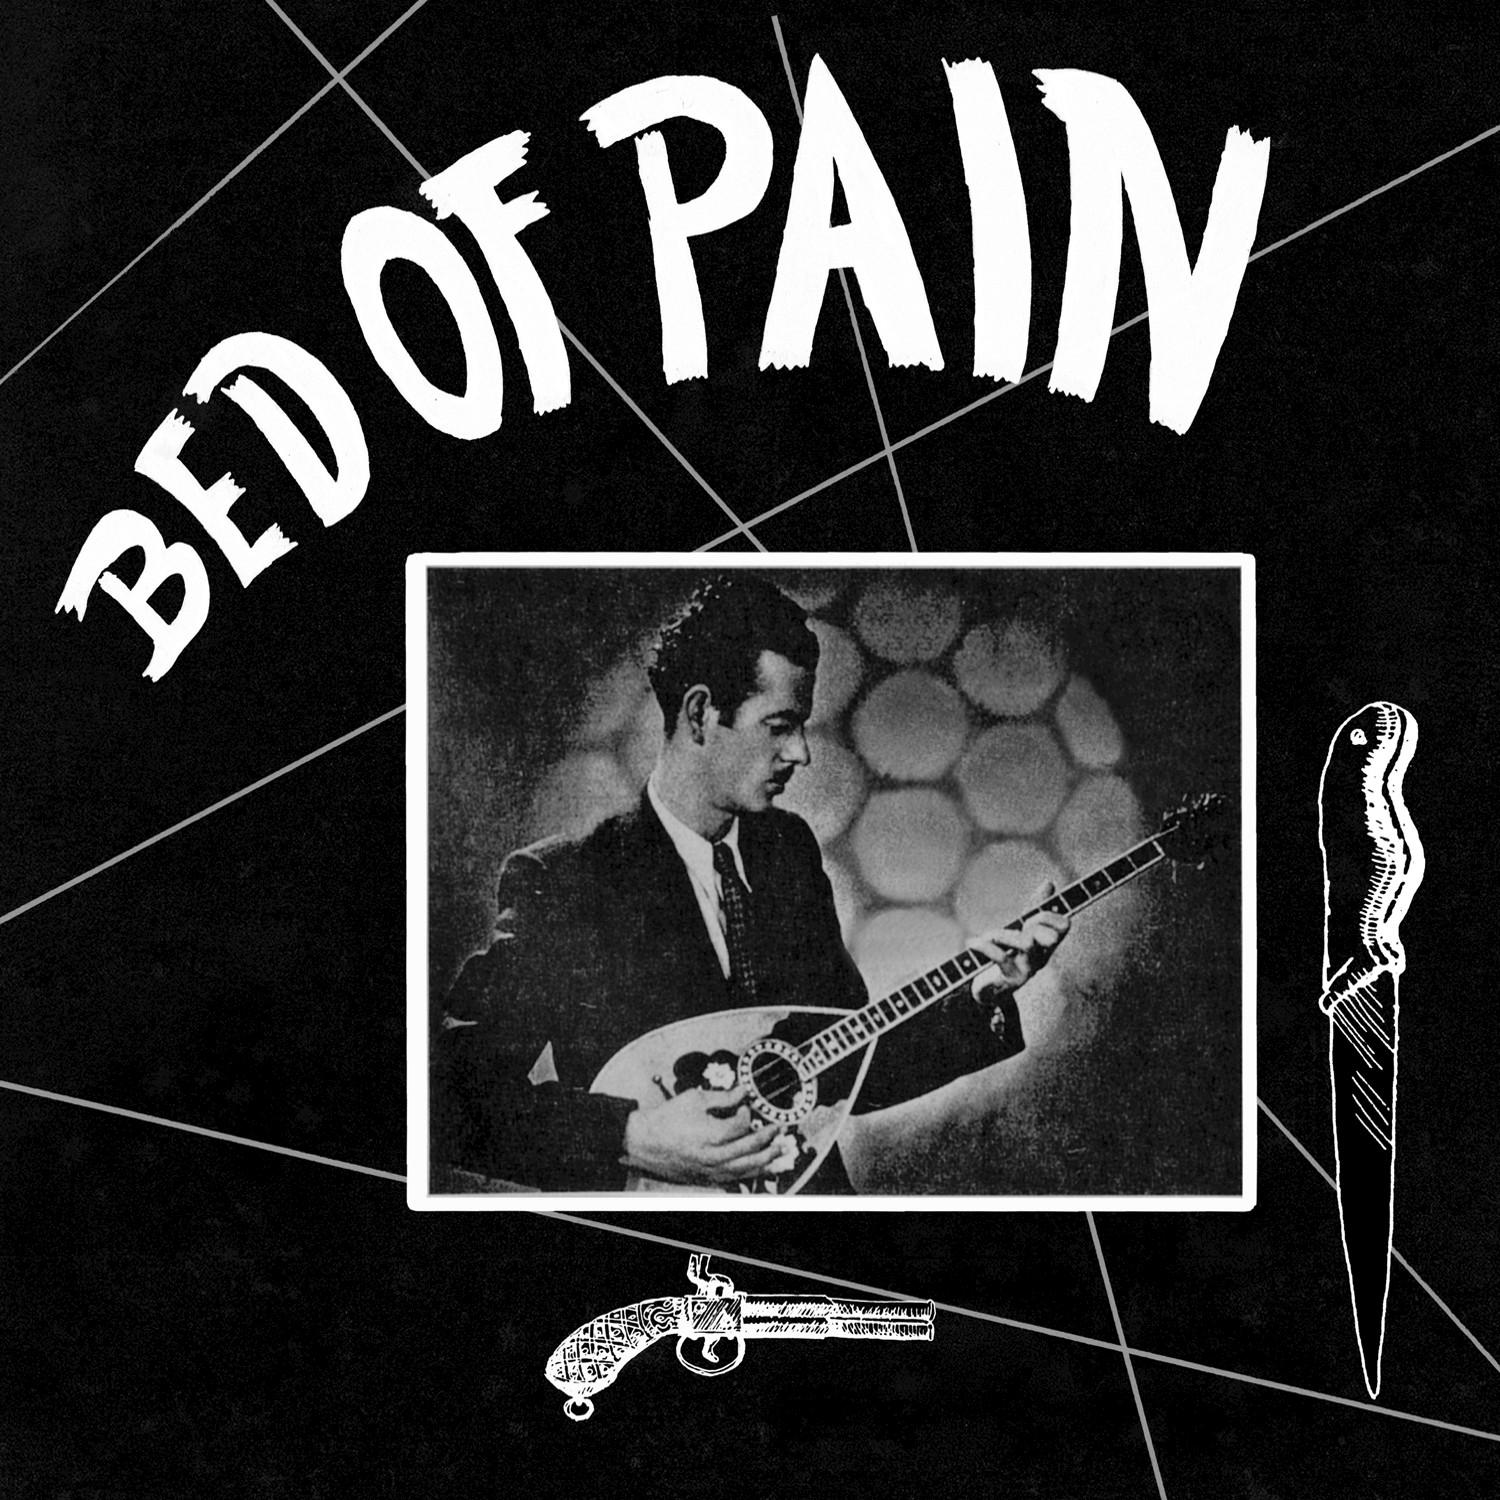 Bed of Pain: Rembetika 1930-55